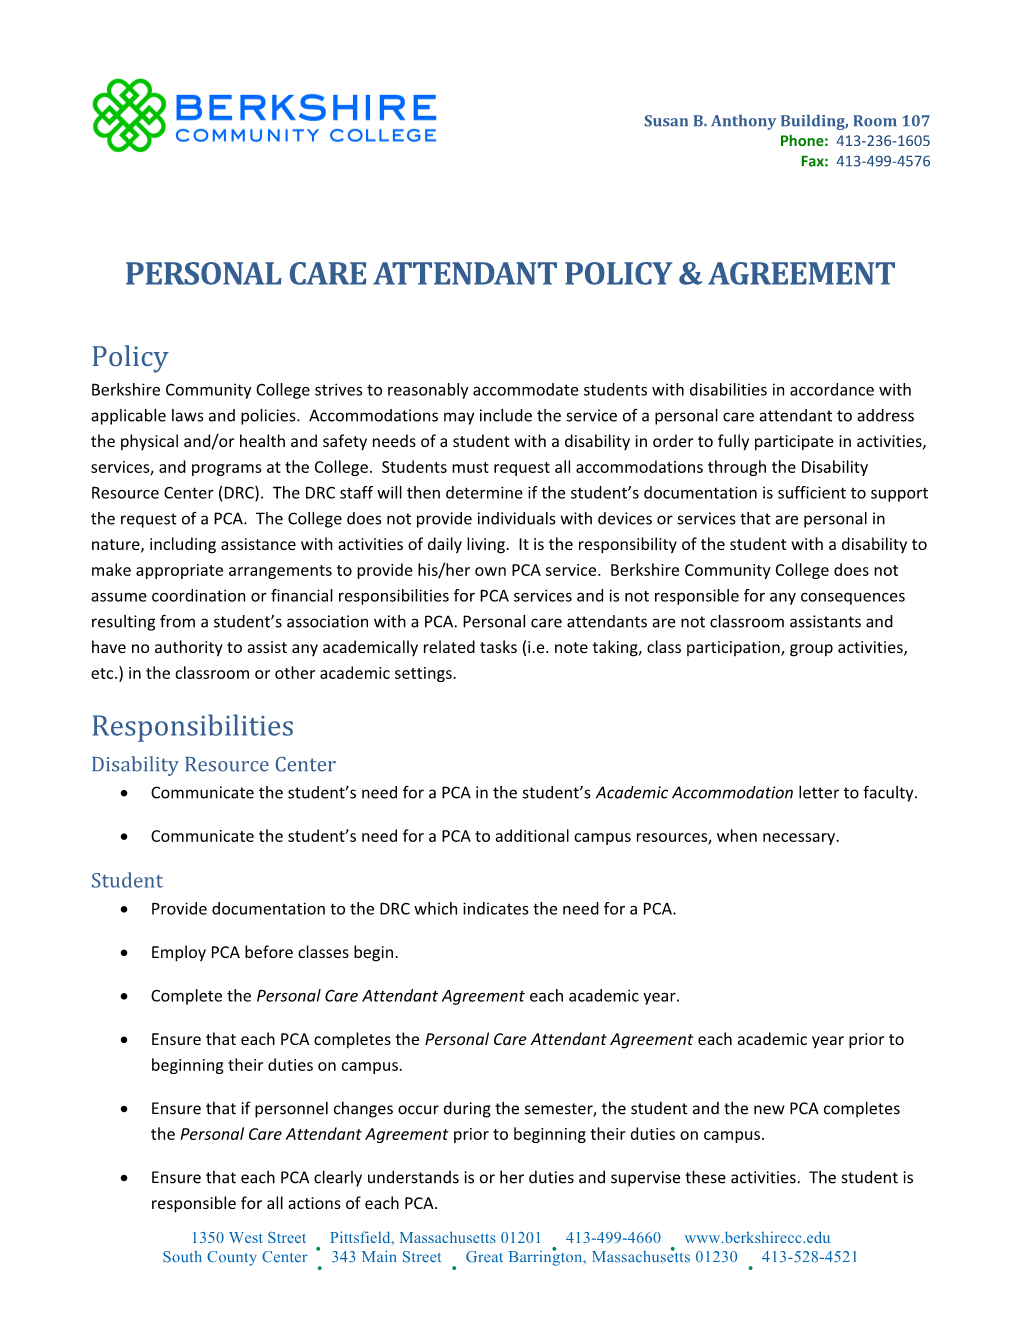 Personal Care Attendant Policy & Agreement